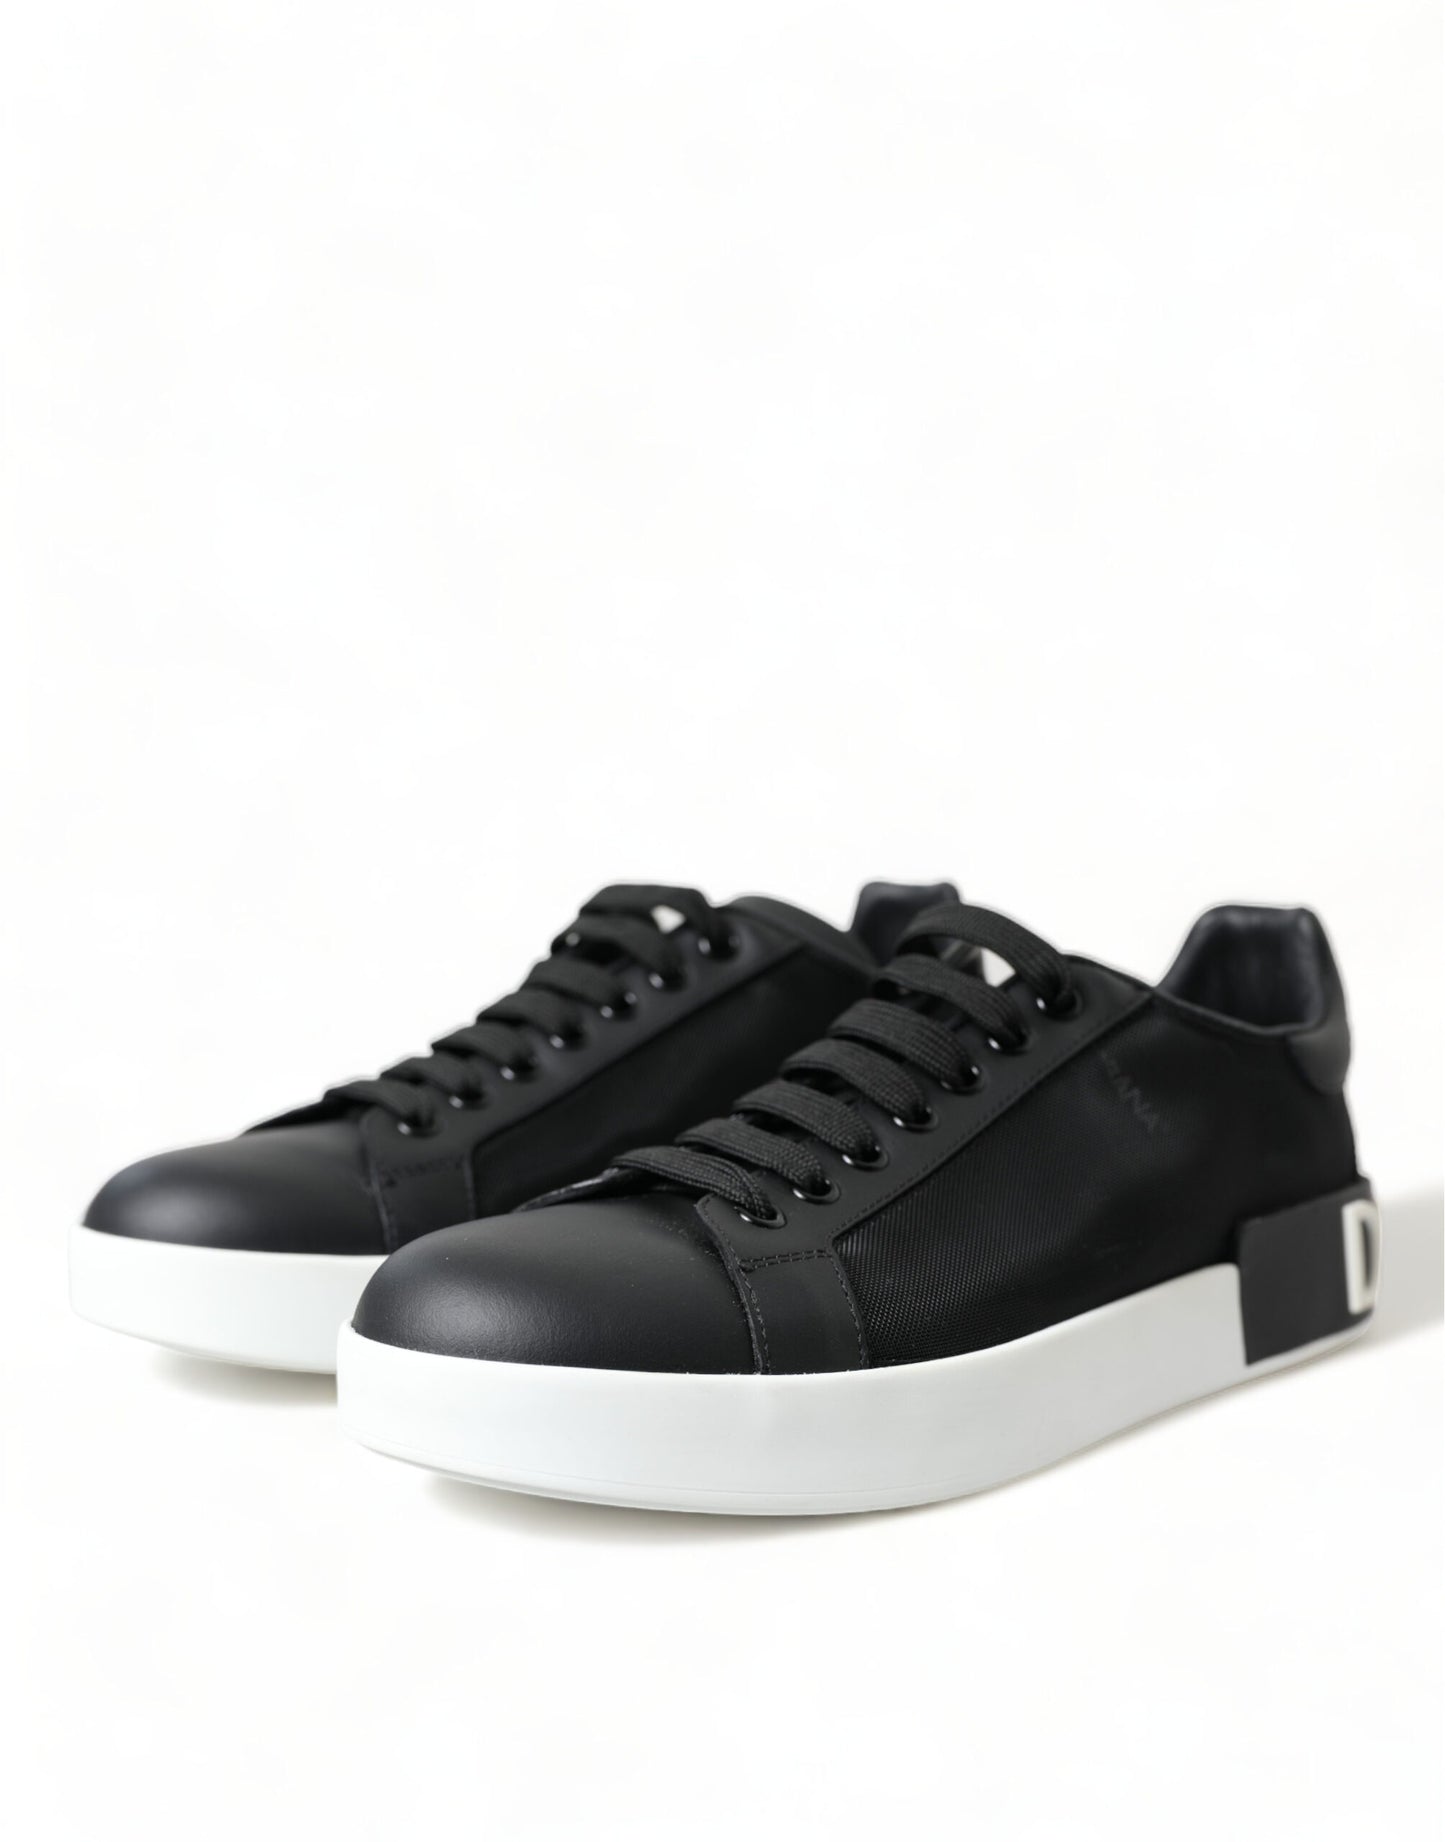 Dolce & Gabbana Elegant Black and White Low-Top Sneakers